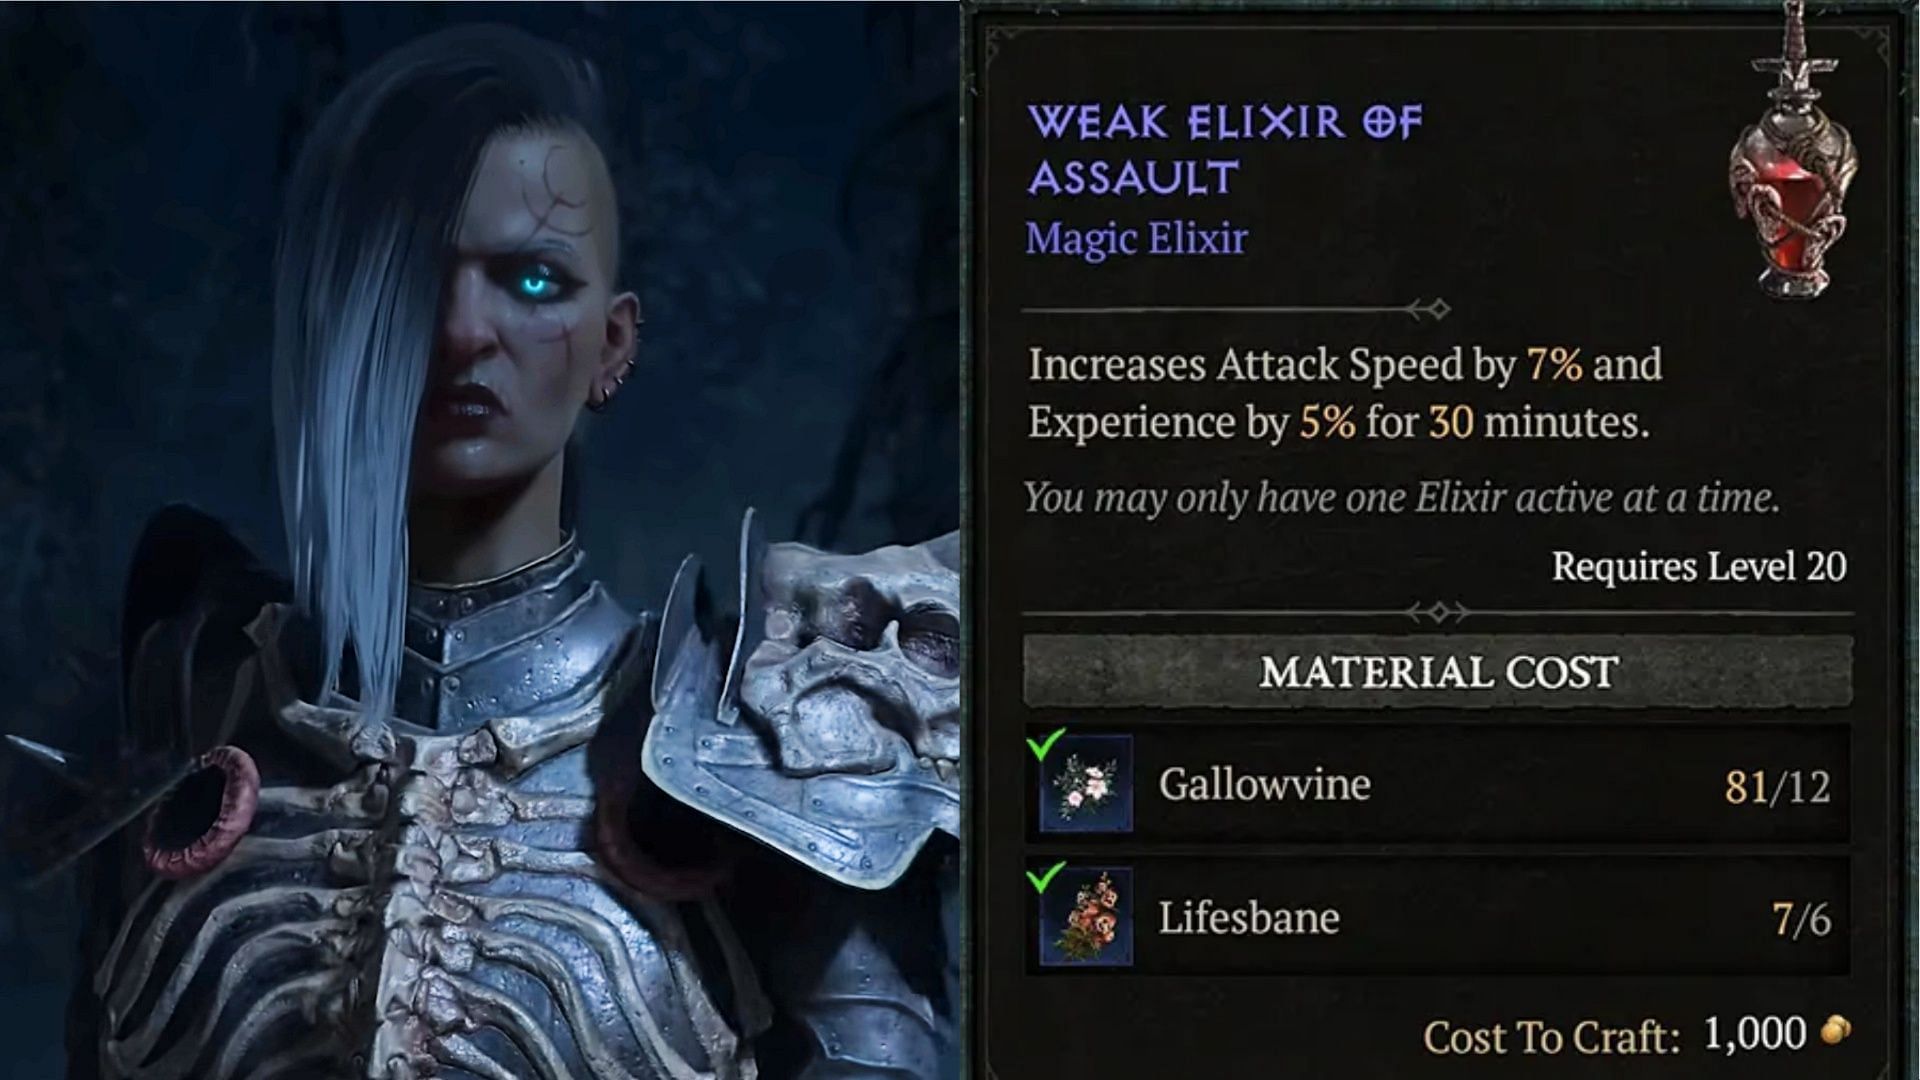 The Assault Elixir boosts the attack speed of a character (Images via Blizzard)